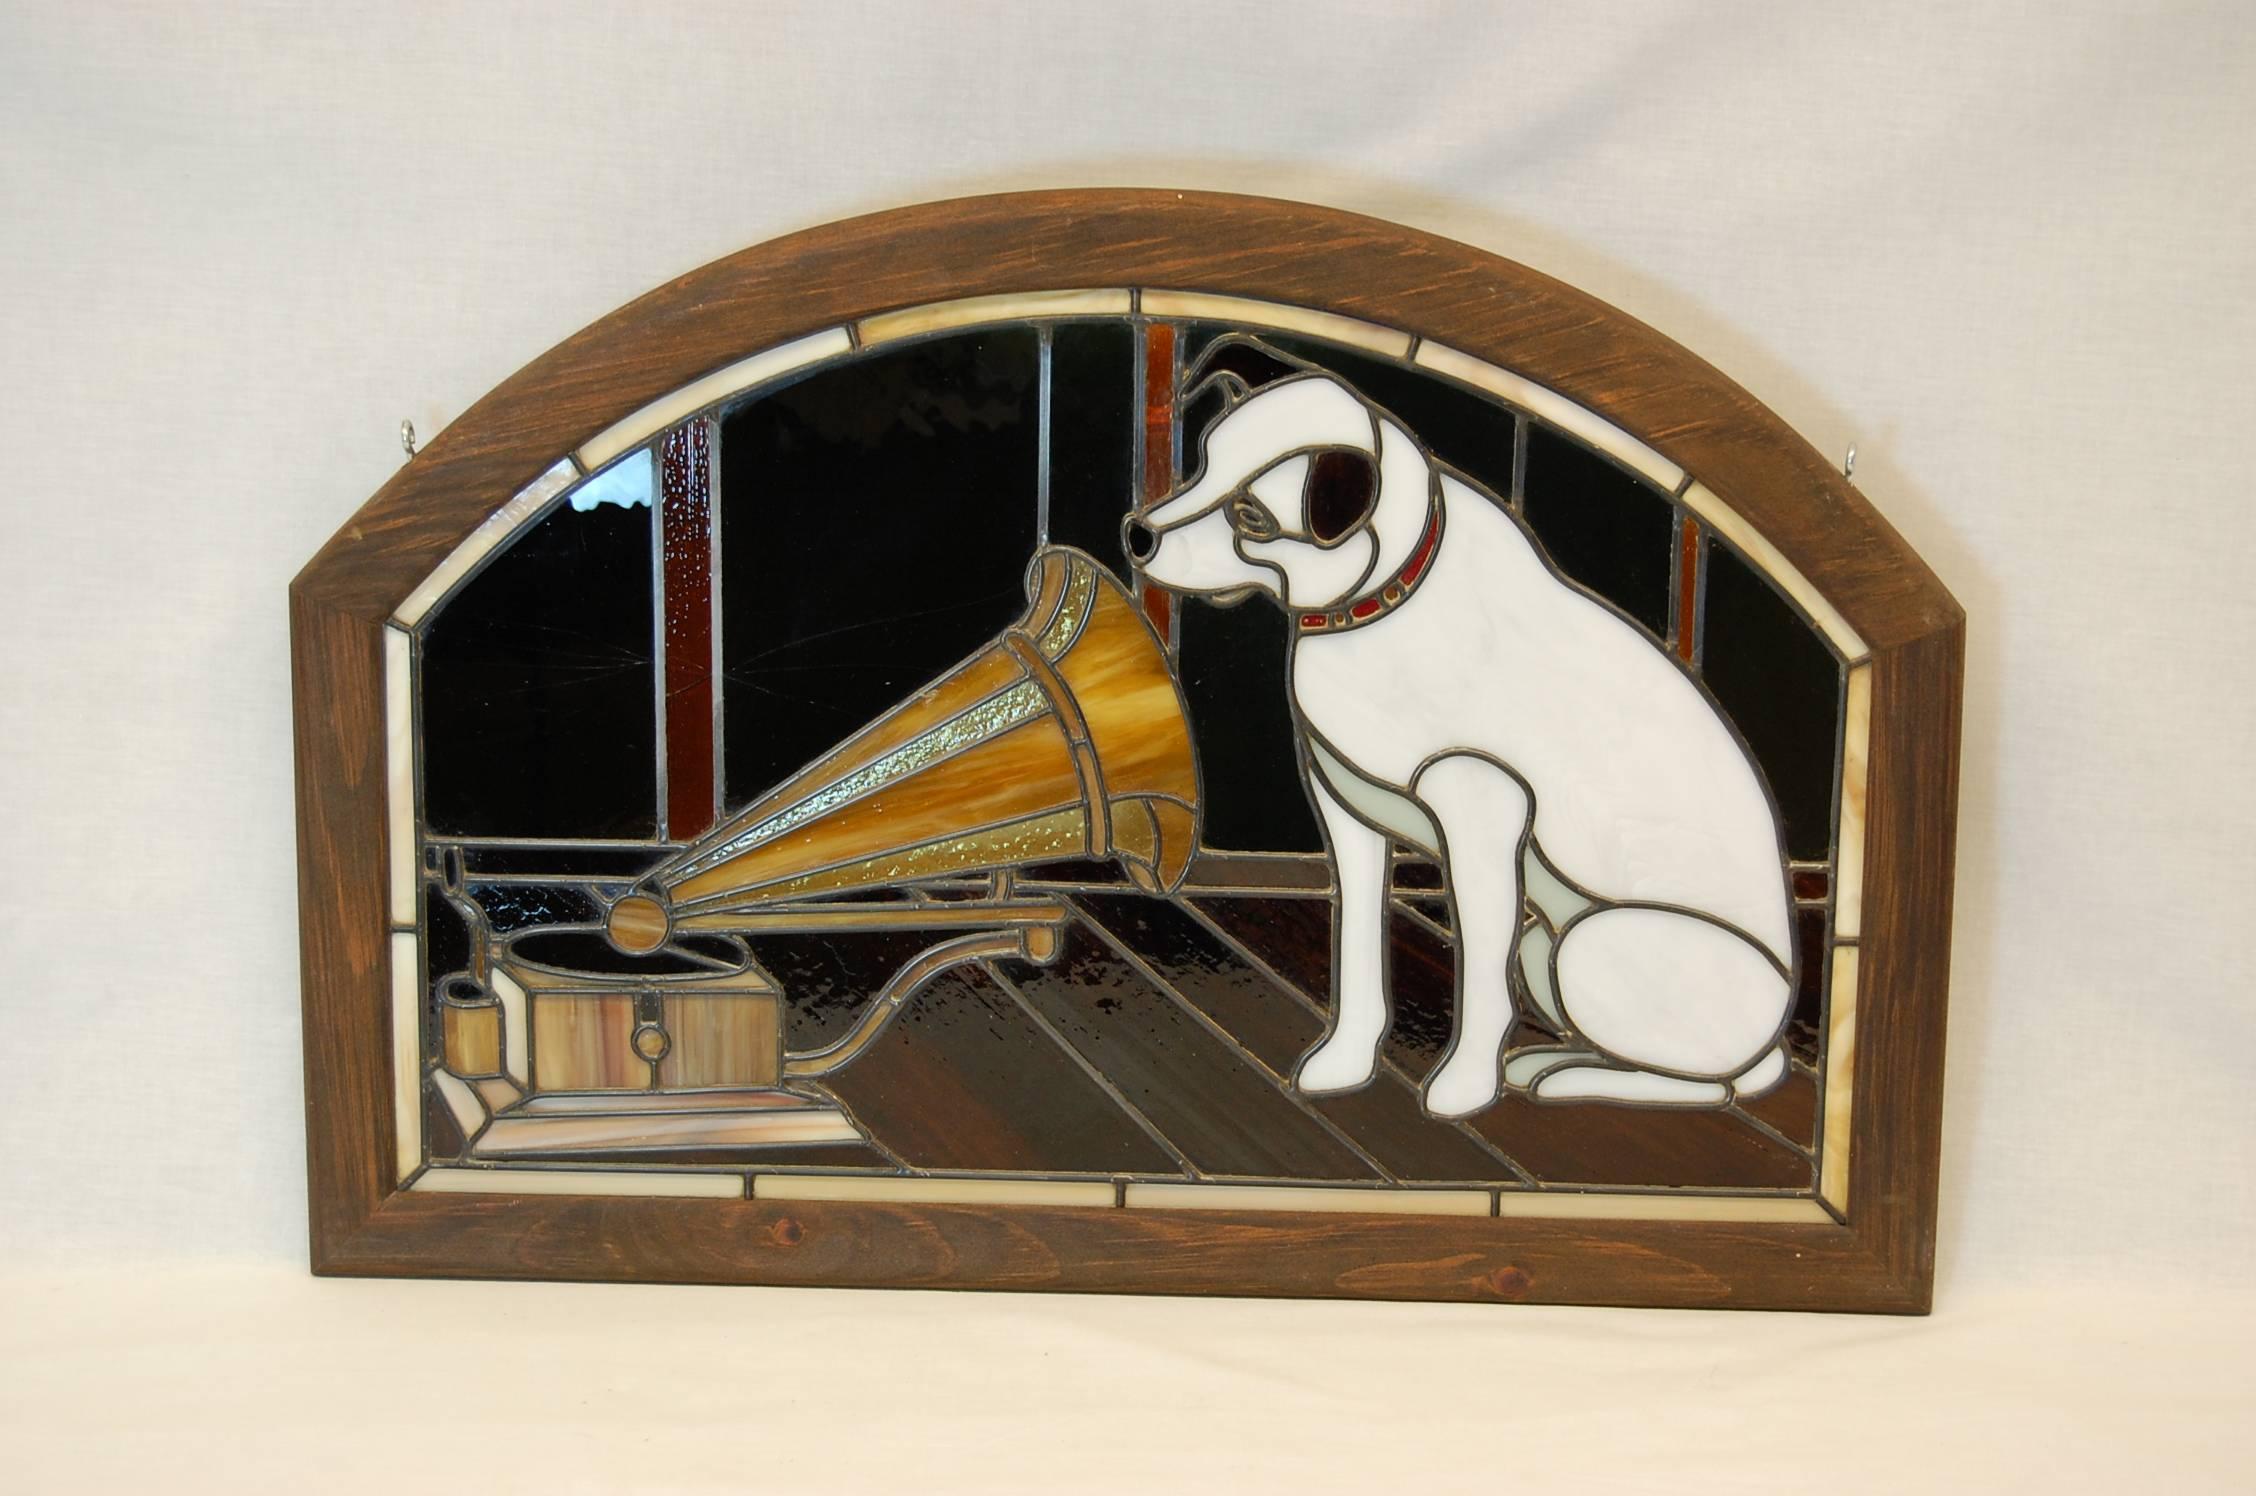 This image of nipper became the trademark for RCA in 1929; this framed stained glass panel was probably made in the early 20th century.